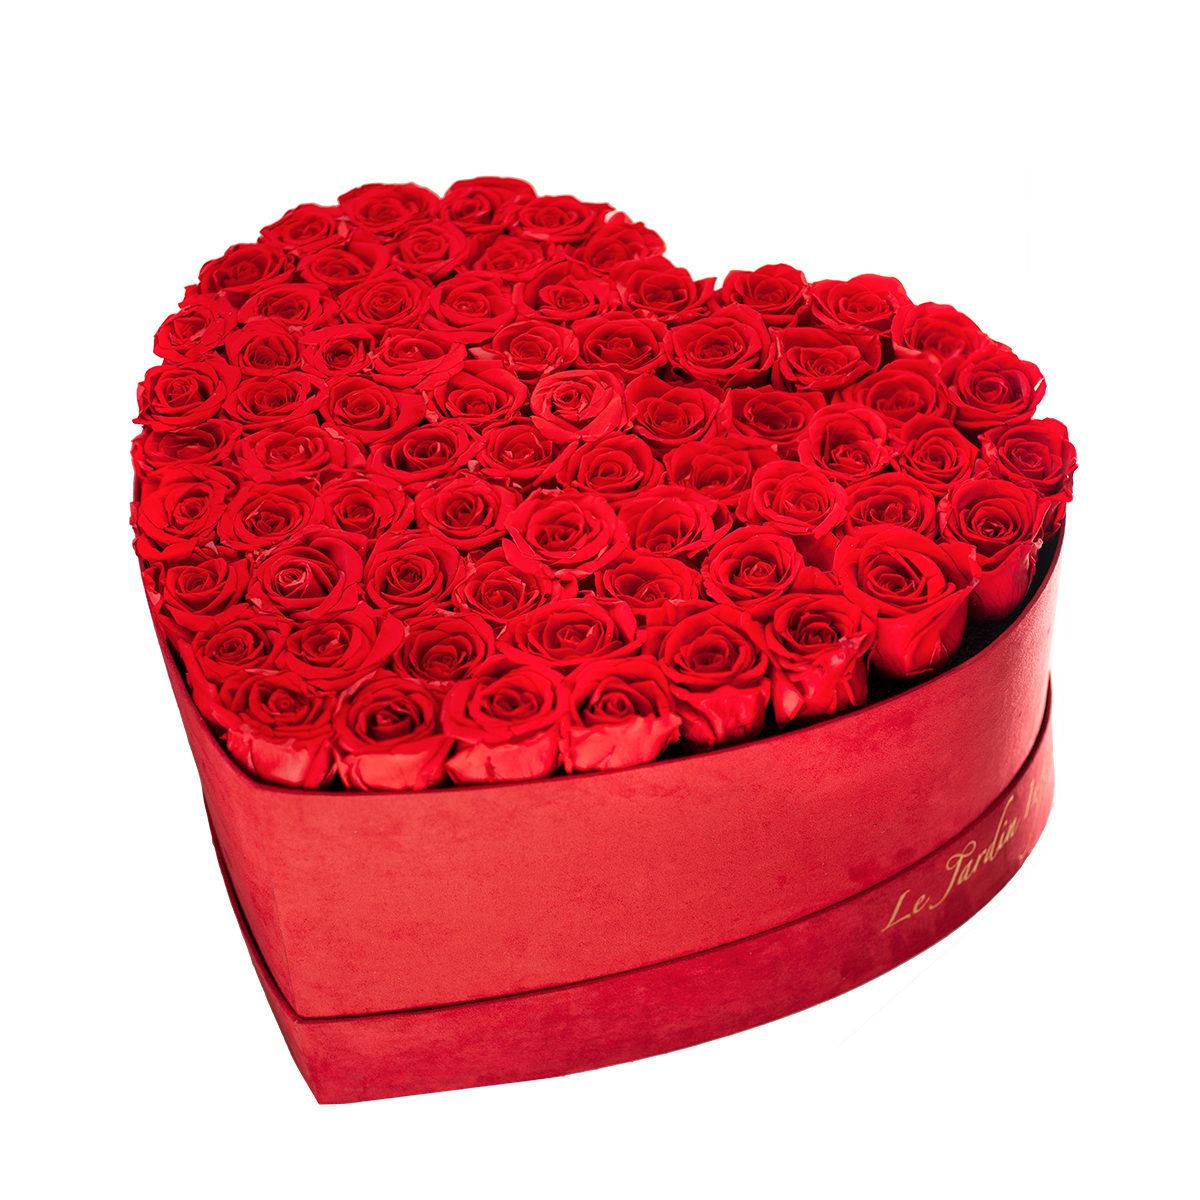 55-65 Red Preserved Roses in A Heart Shaped Box- Medium Heart Luxury Castorite